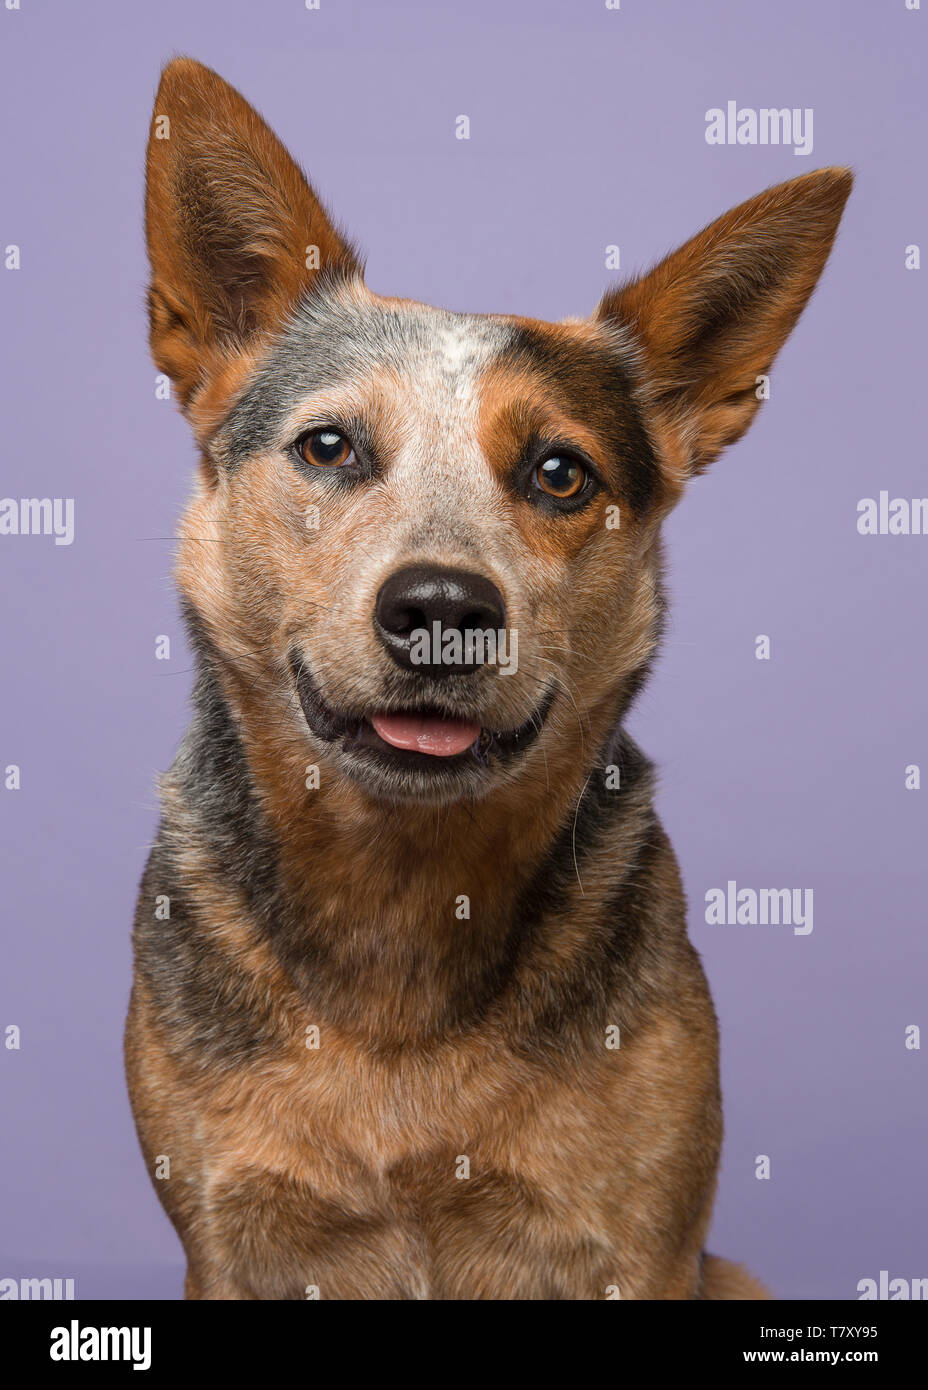 ser godt ud Banzai Afgørelse Portrait of a australian cattle dog looking cute with tongue a bit out on a  purple background in a vertical image Stock Photo - Alamy